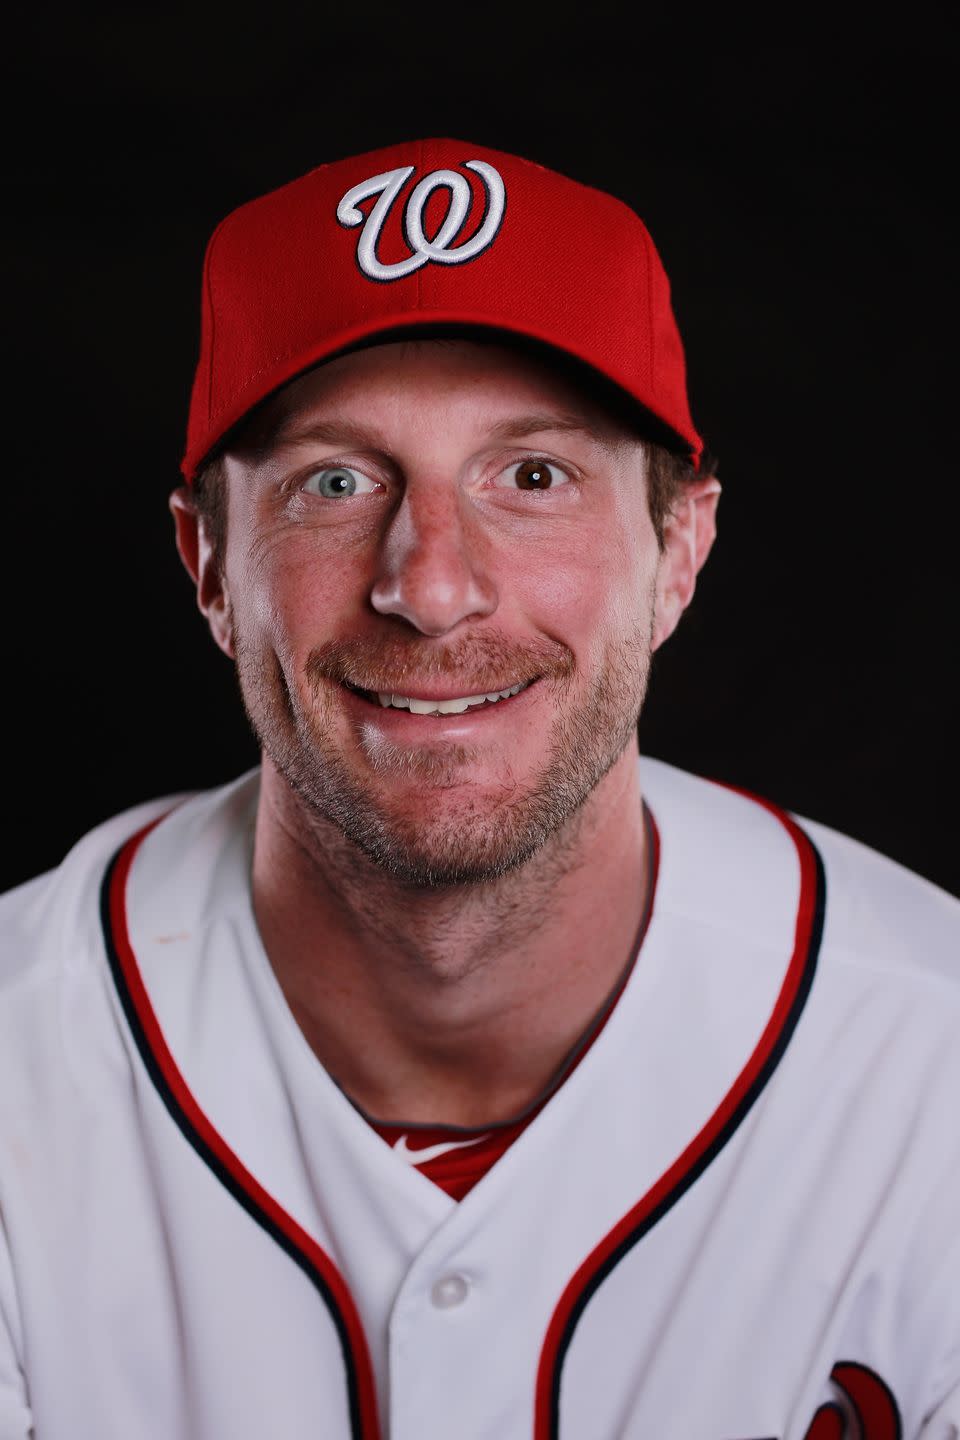 <p>This Washington Nationals pitcher has one of the most extreme cases of heterochromia, with one eye being quite light while the other is very dark.</p>